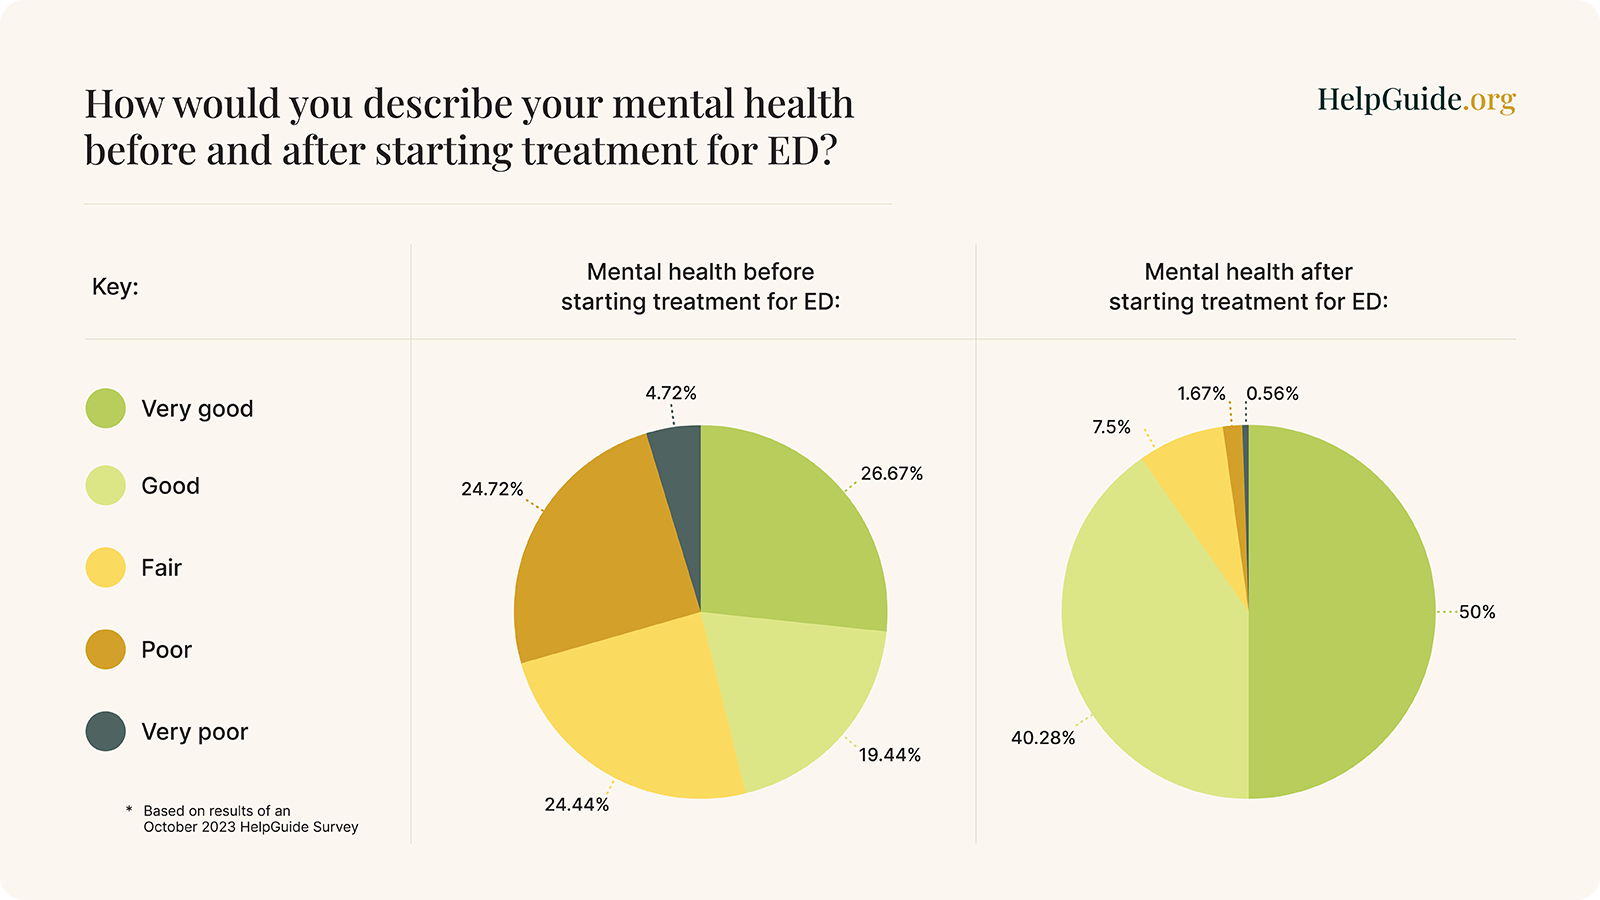 Pie charts comparing mental health before and after ED treatment